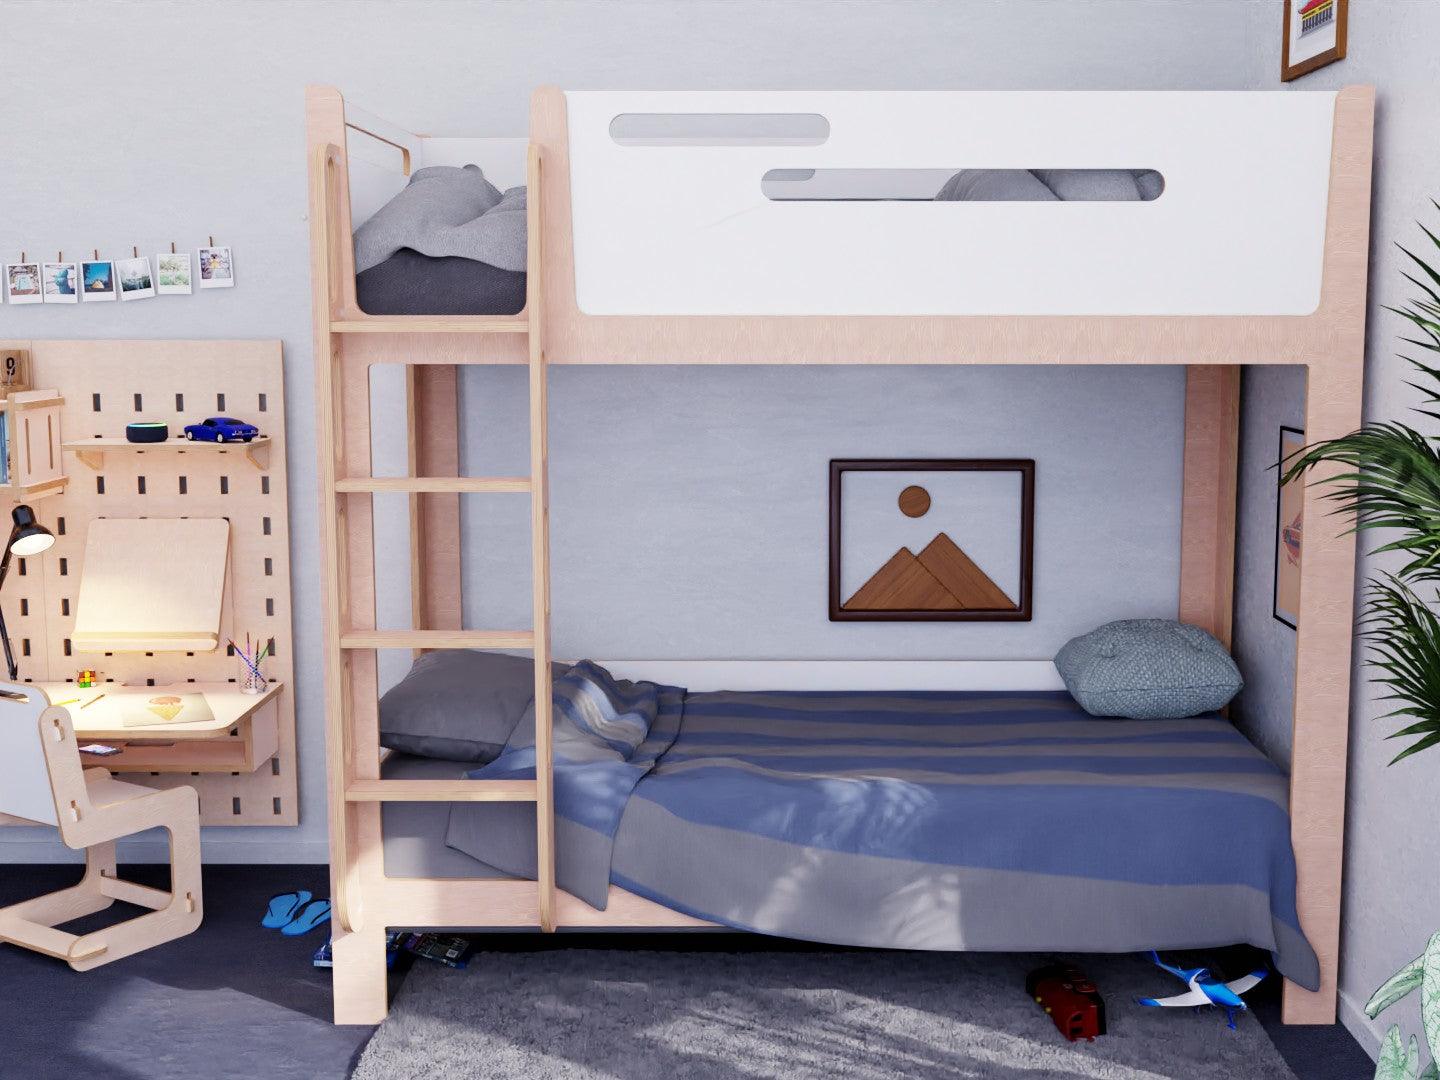 Upgrade to our elevated plywood bunk beds. Complete with study set, shelves. Choose your colour!